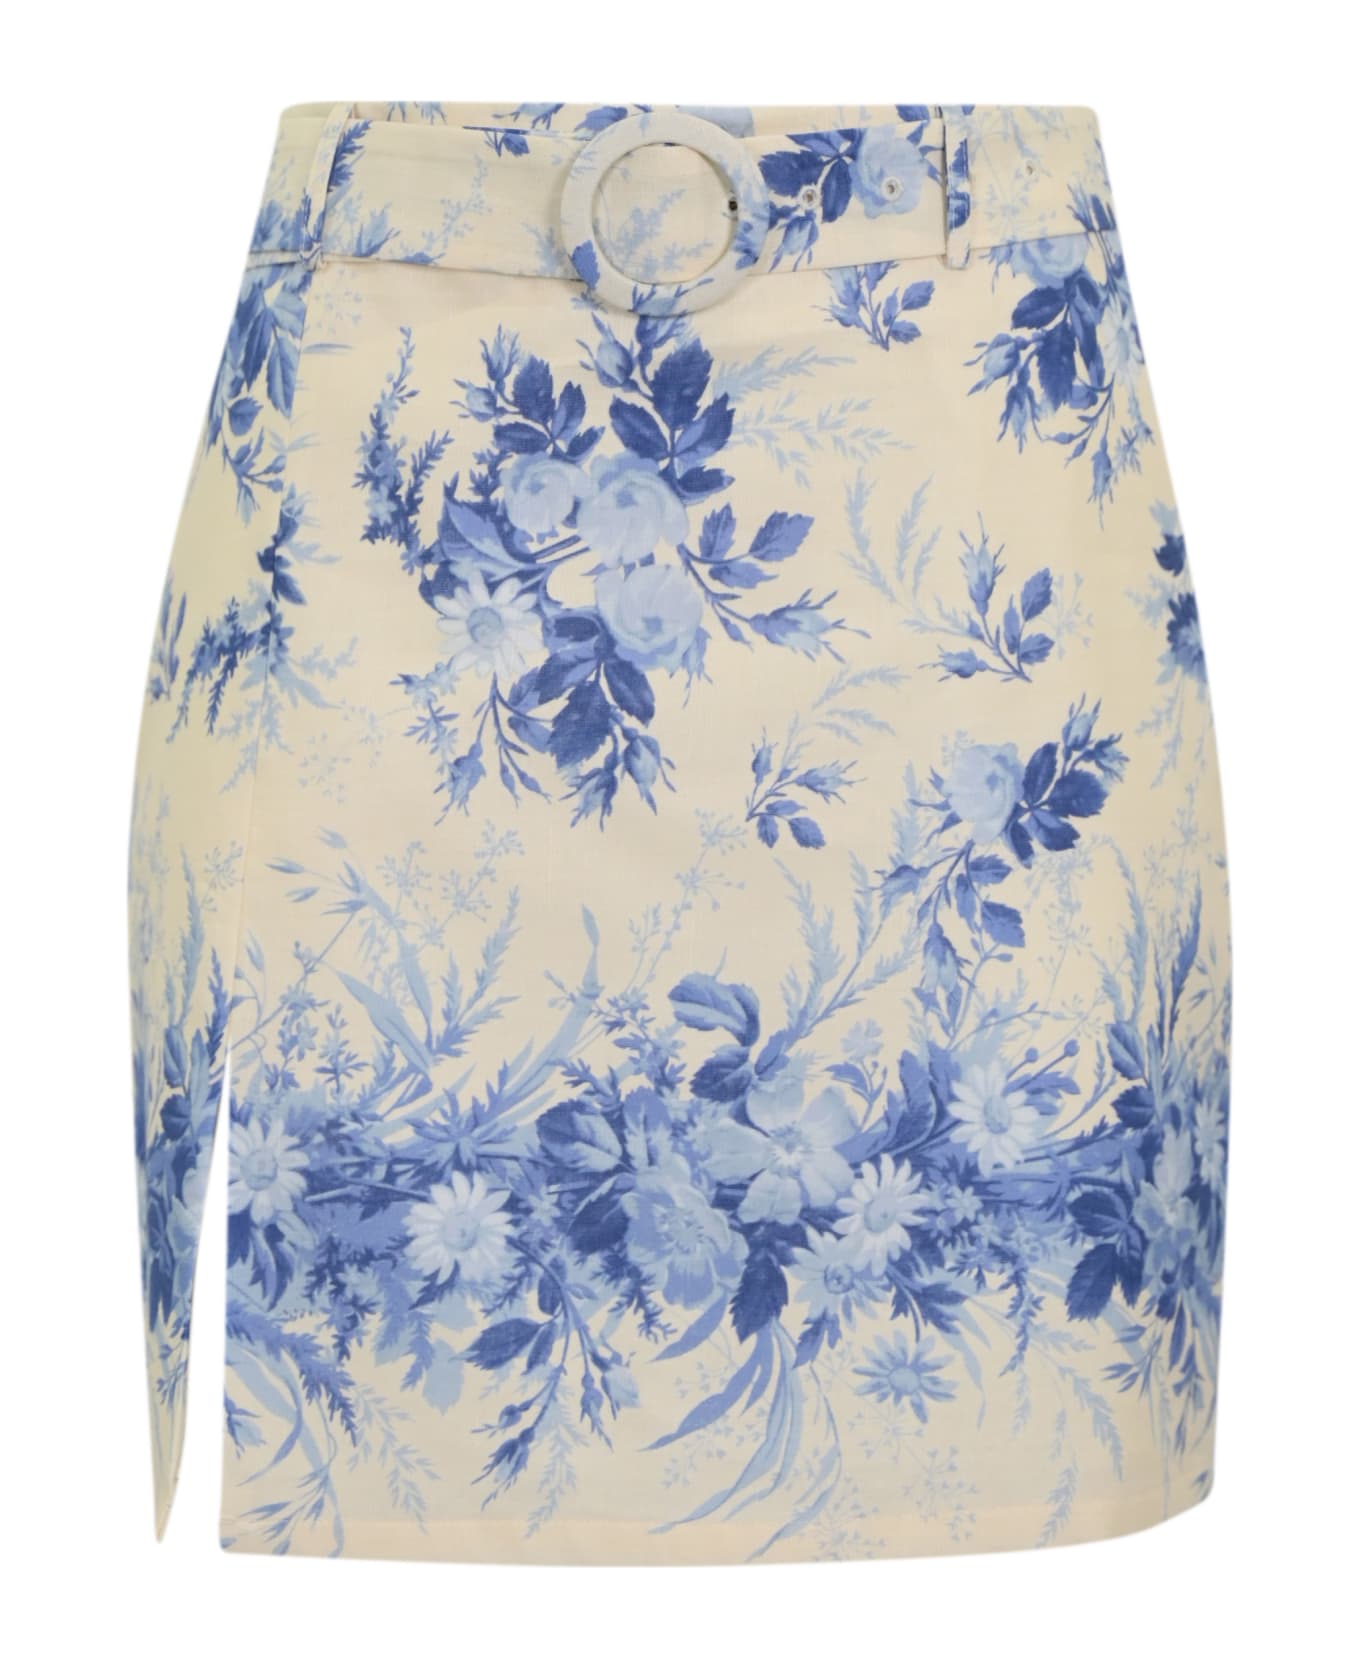 TwinSet Linen Skirt With Print - Avorio/blue